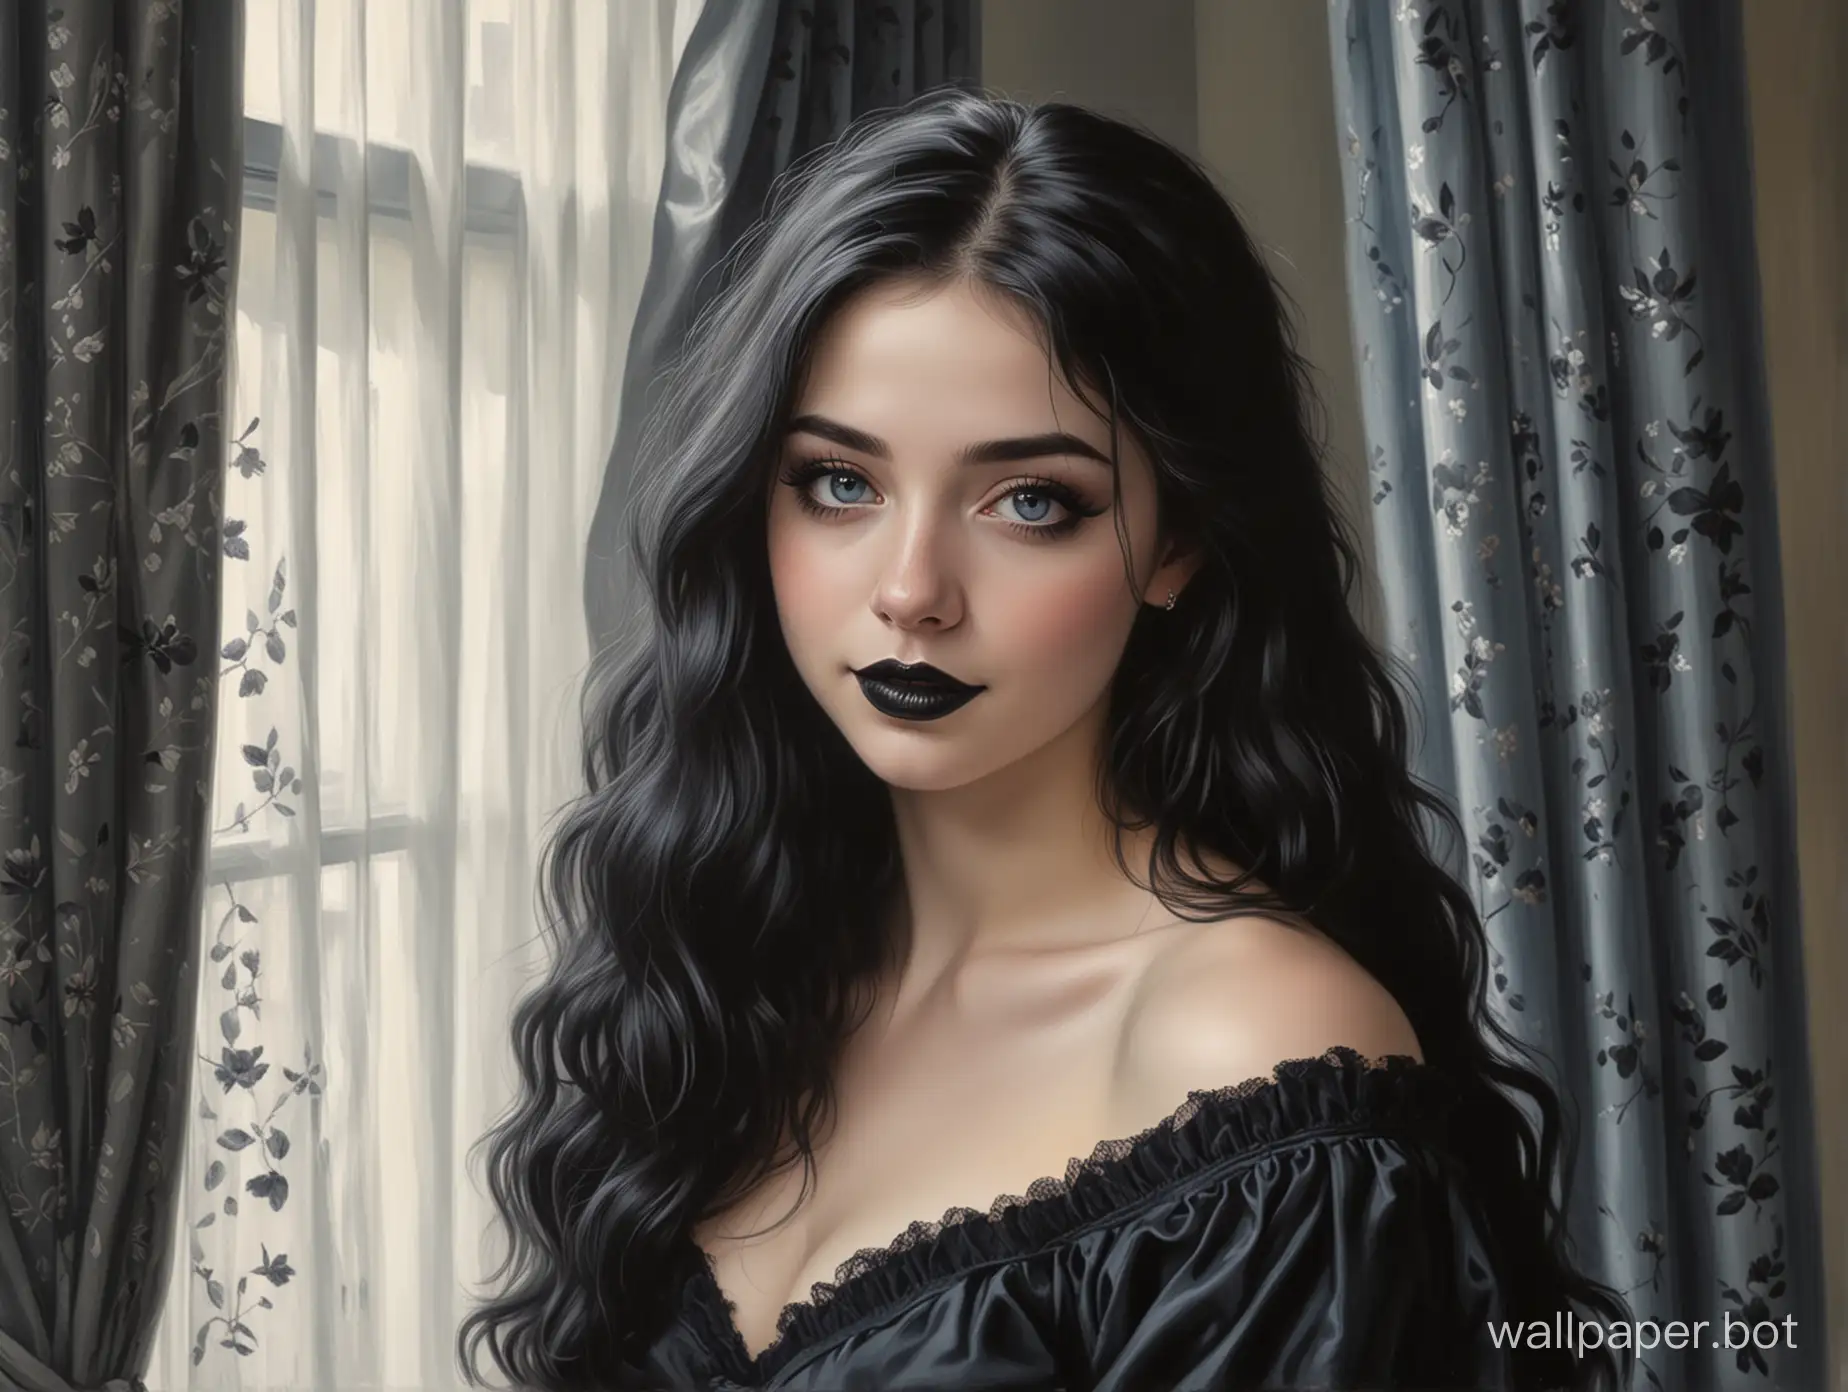 painting of a beautiful 18 year old goth girl, she is wearing black lipstick, she is pretty, she has blue eyes, she has pale skin, black lips, she has long jet-black hair that is wavy and parted in the middle and falls in curtains, she has a beautiful innocent face, smiling, beaming, very cute, perfect, sense of wonder, Velazquez painting style